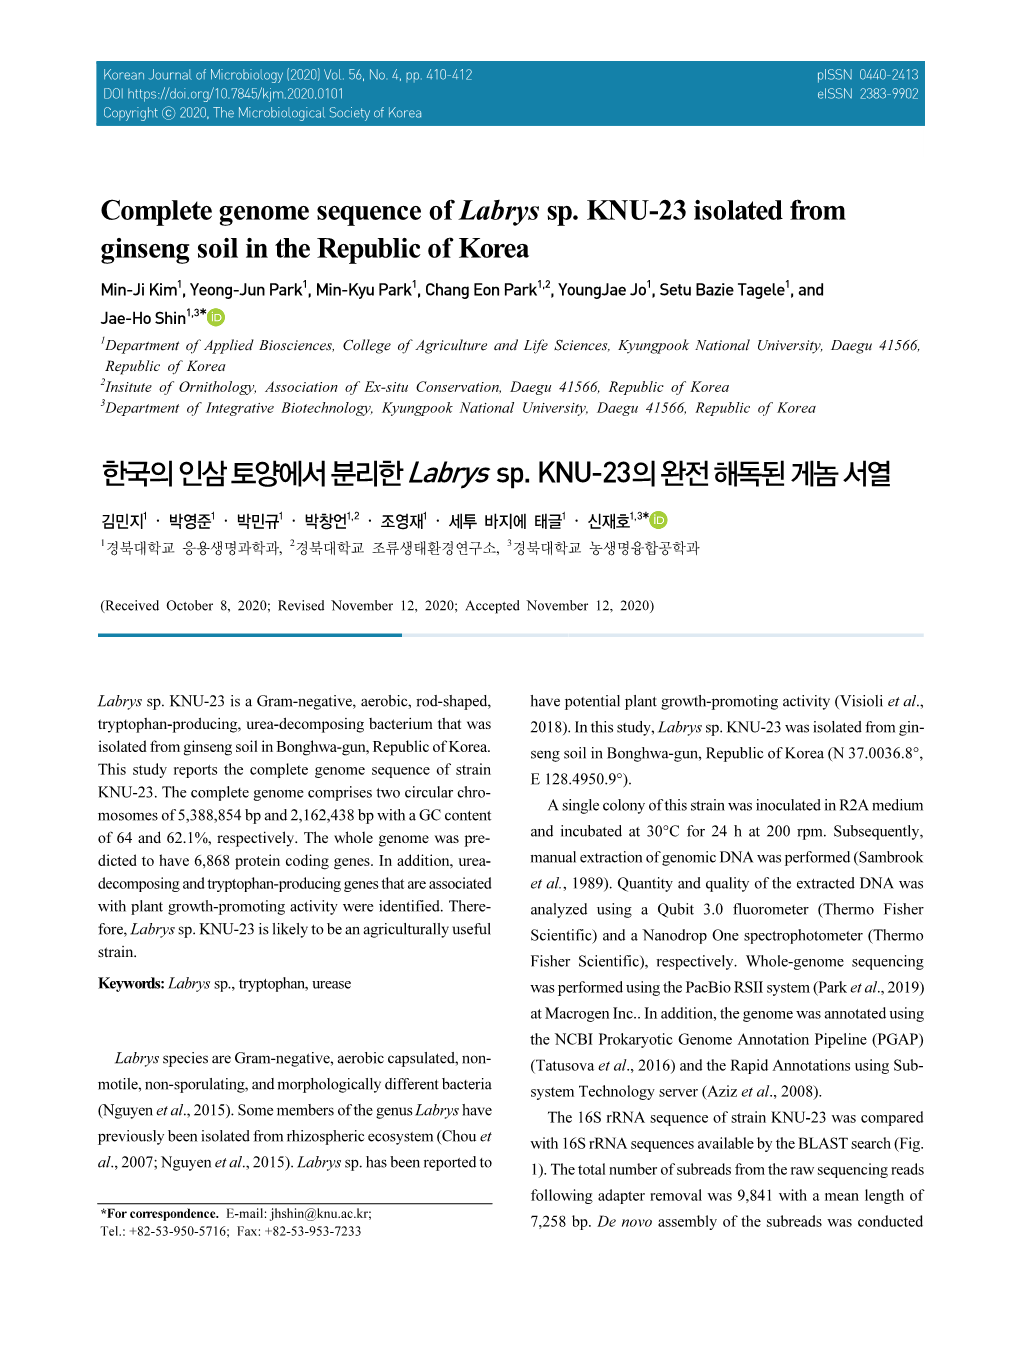 Complete Genome Sequence of Labrys Sp. KNU-23 Isolated from Ginseng Soil in the Republic of Korea